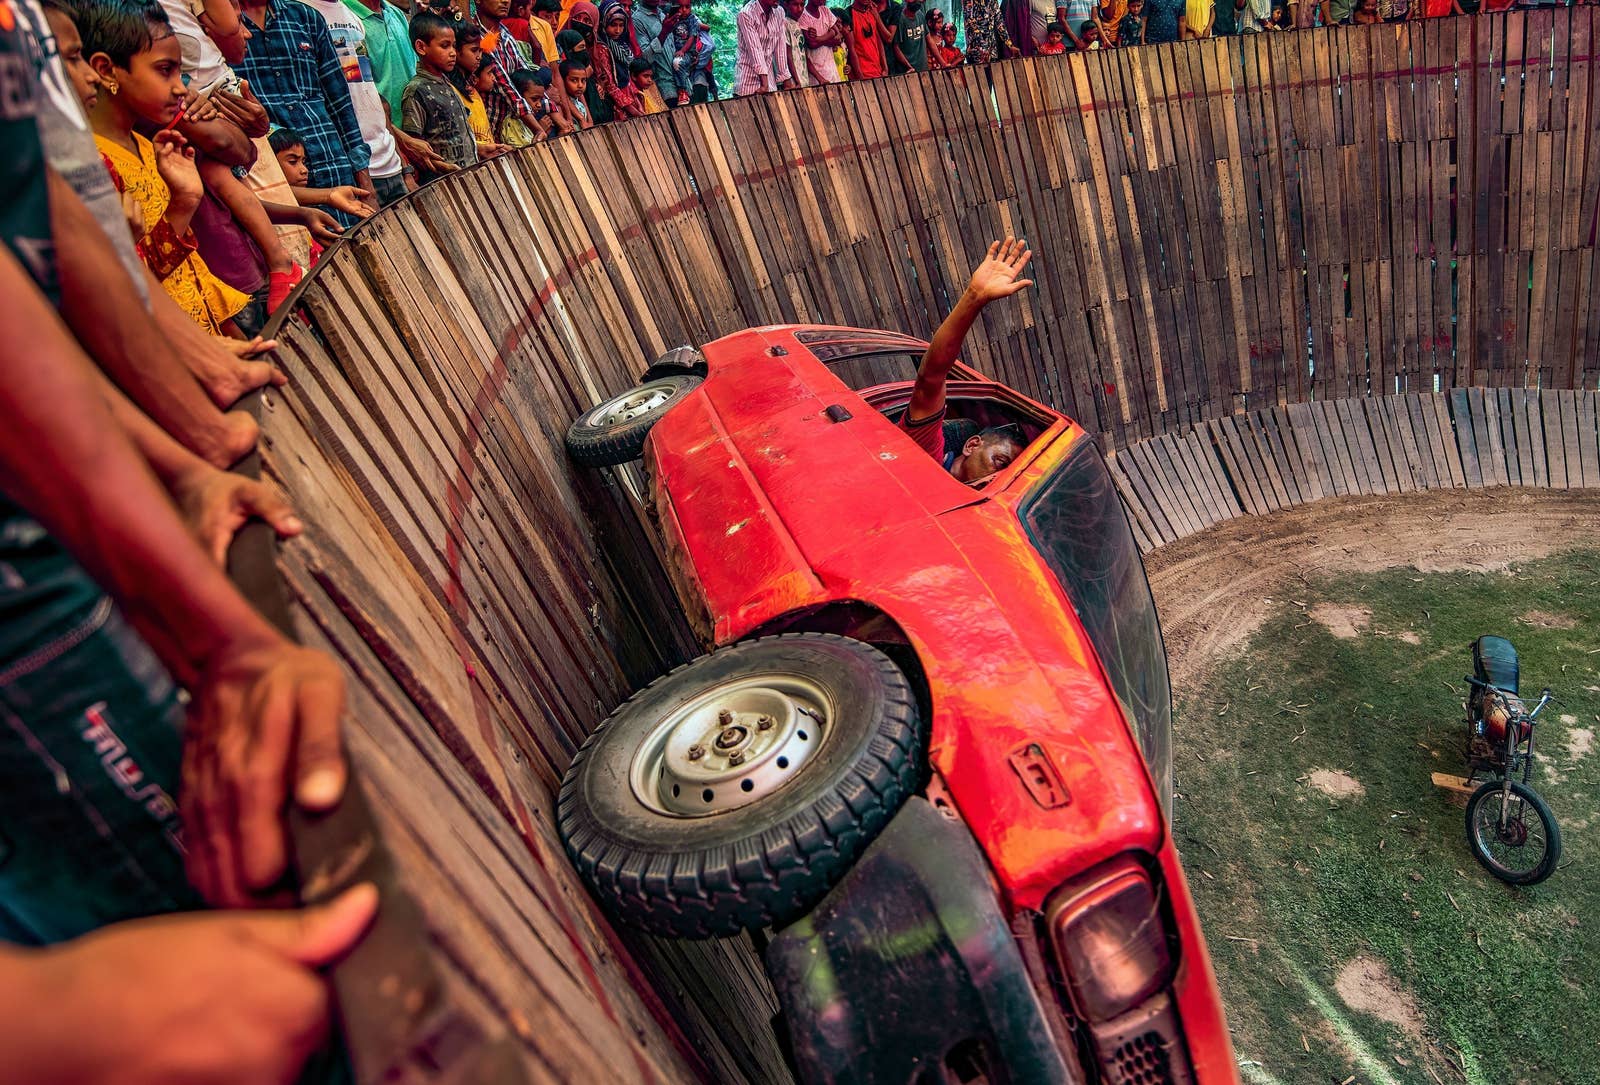 A man waves at the crowd from a red car that is driving around the &quot;Well Of Death,&quot; vertically to the ground.